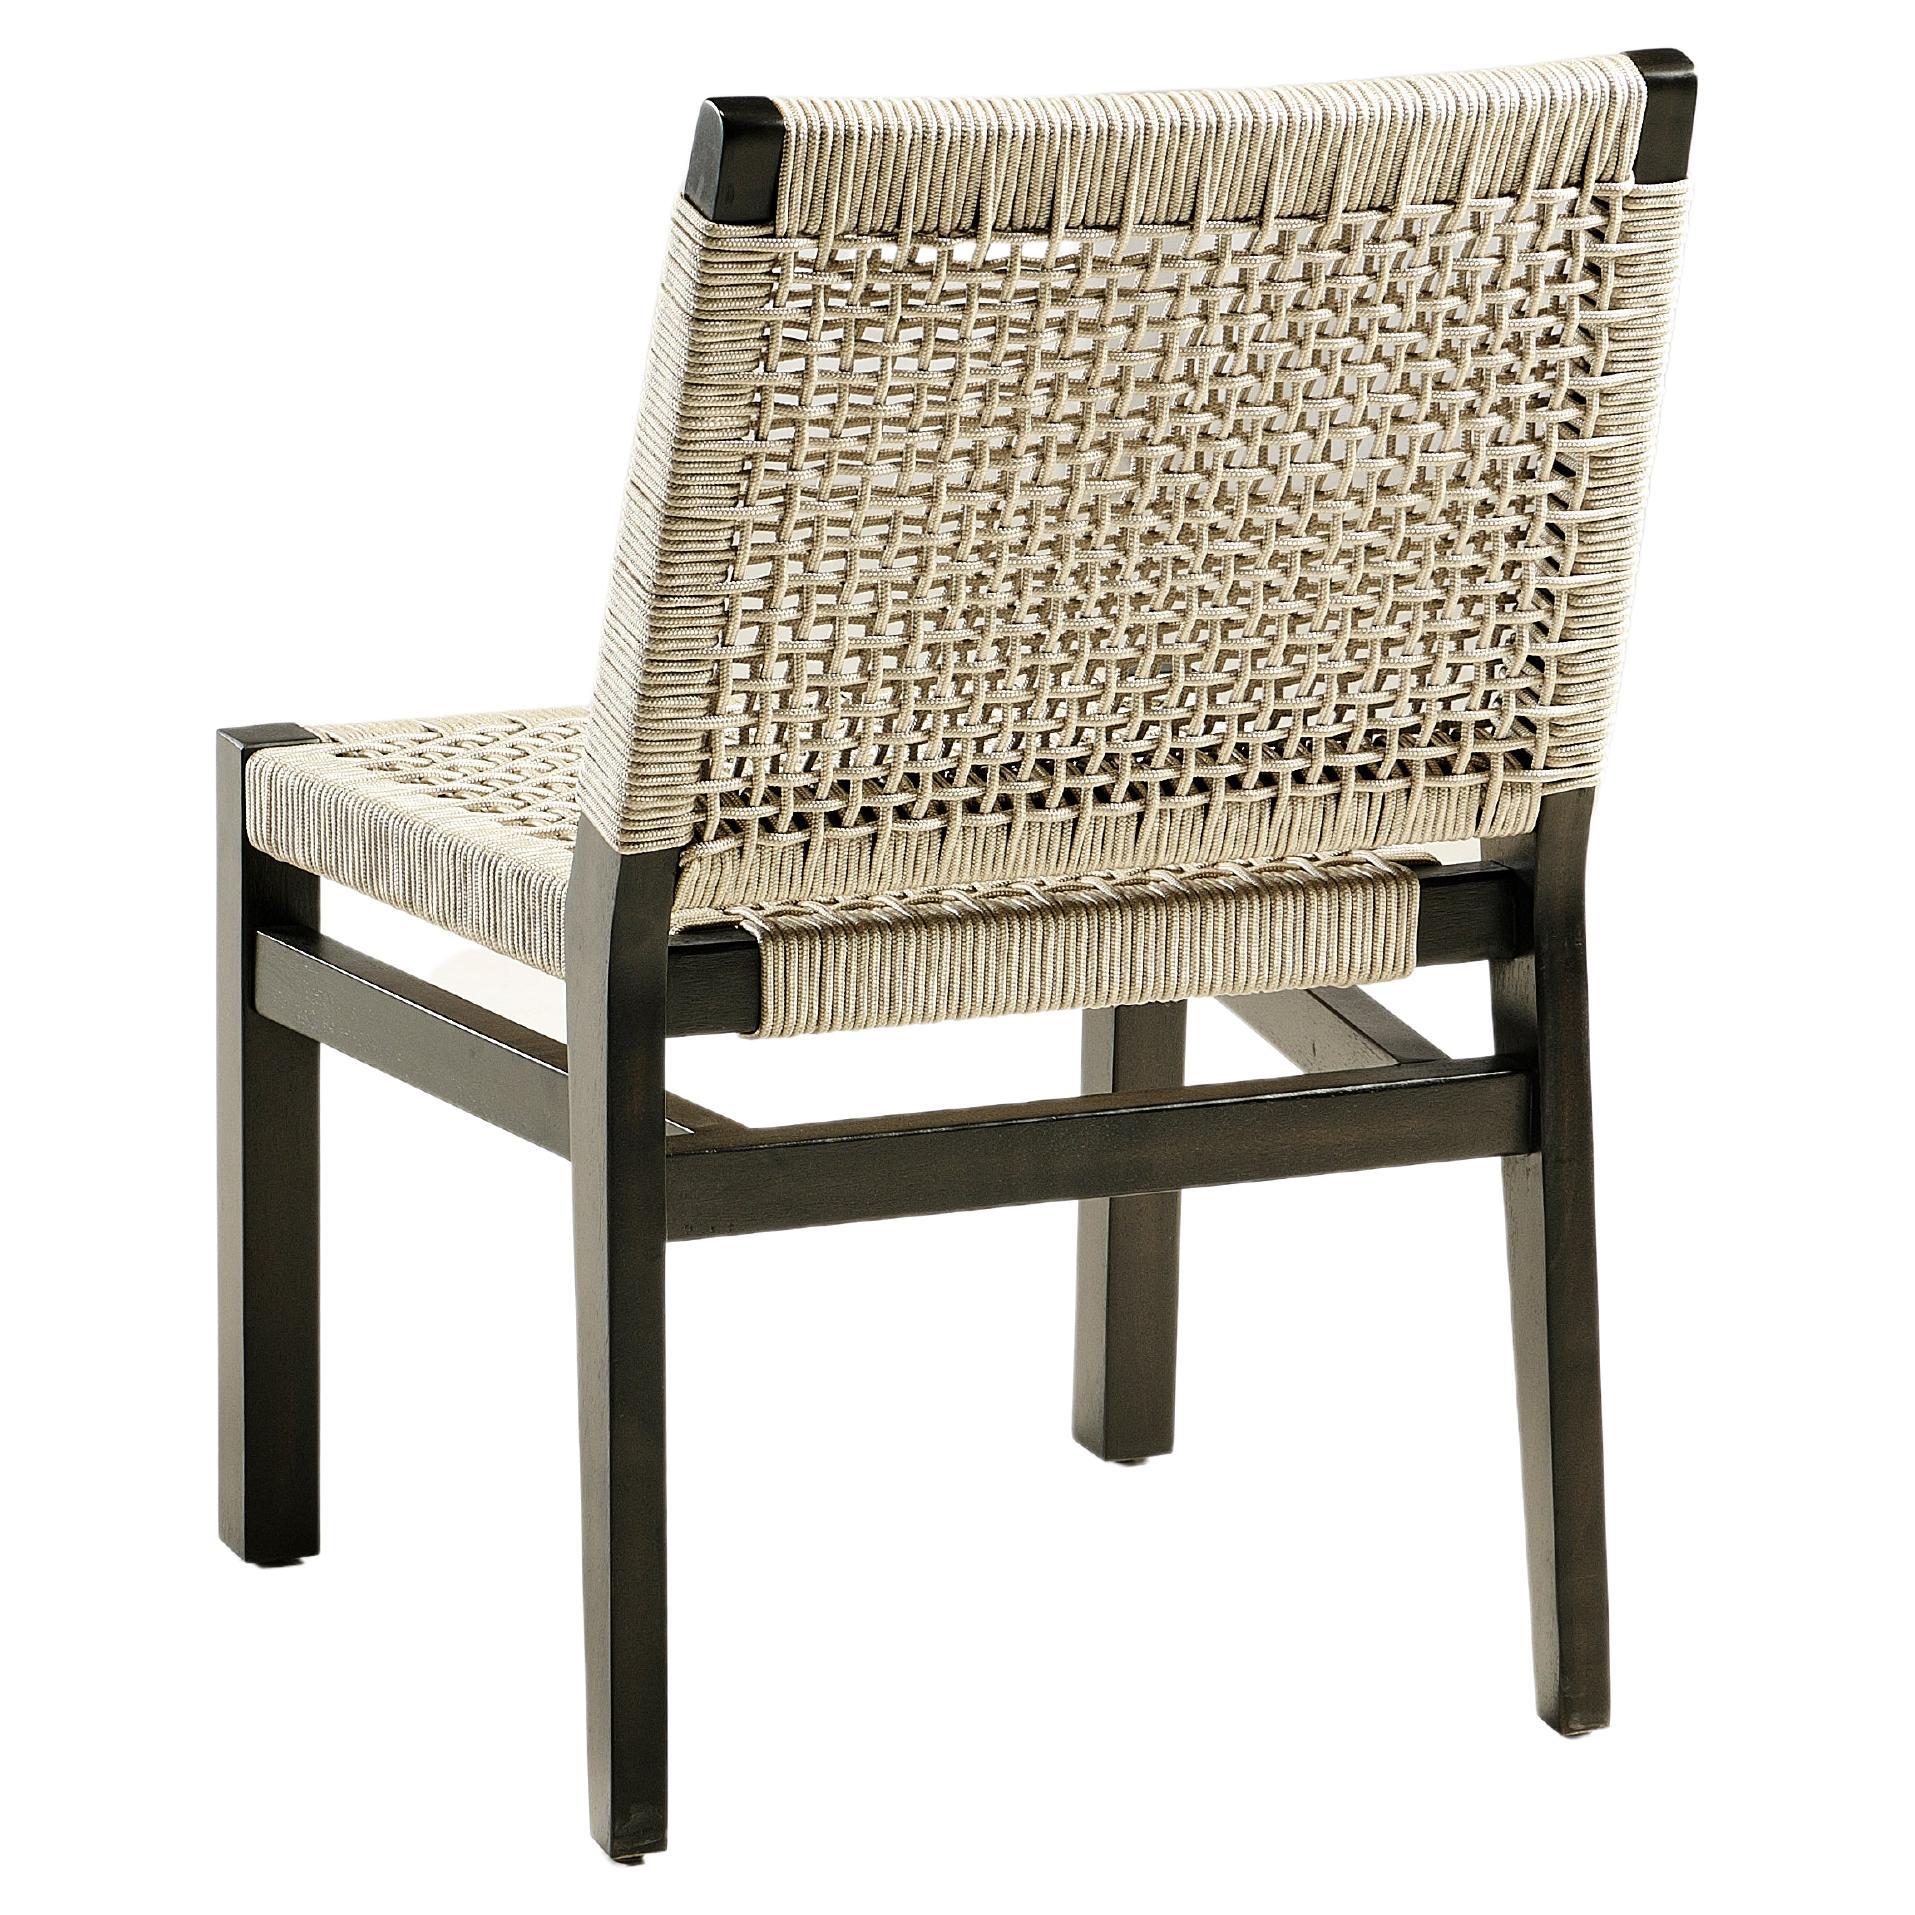 10 Stackable Outdoor Dining Chairs, Wood / Rope